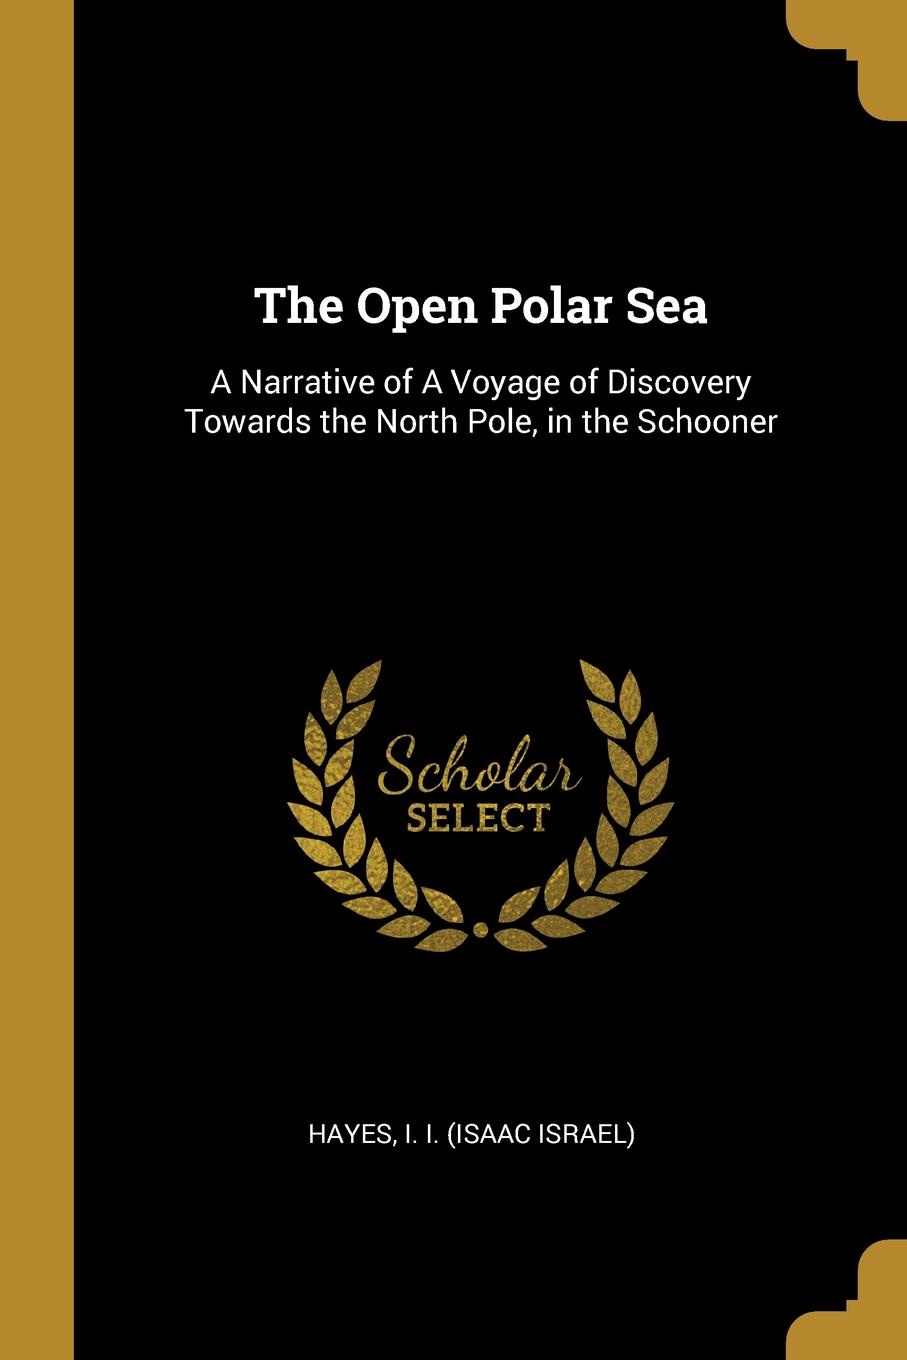 The Open Polar Sea. A Narrative of A Voyage of Discovery Towards the North Pole, in the Schooner